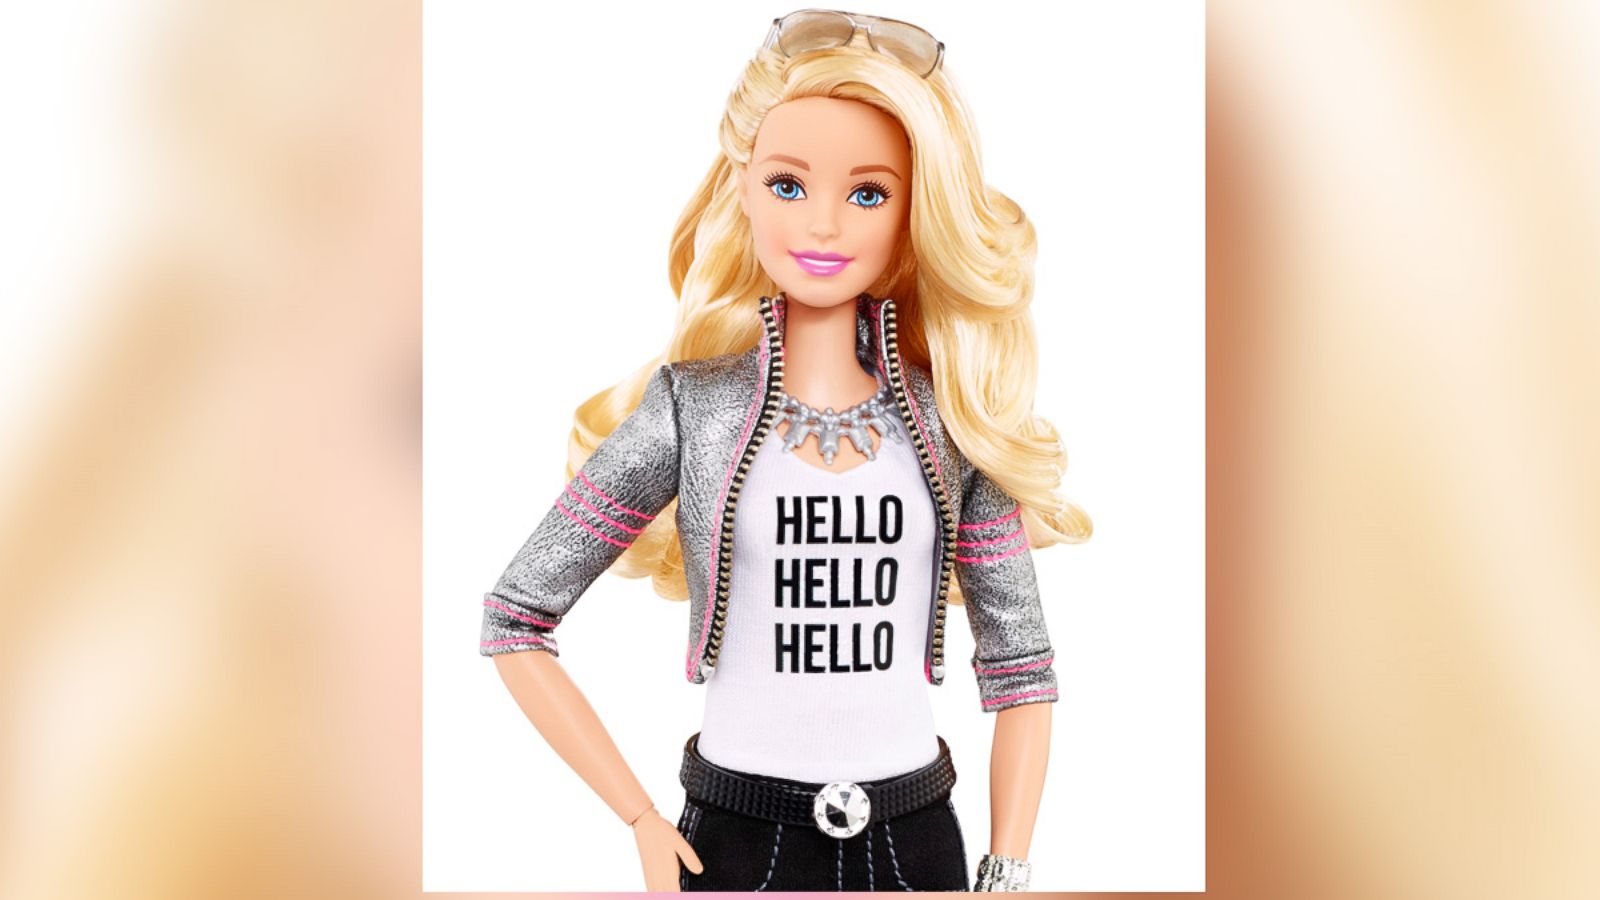 Hello Barbie: Internet Connected Doll Can Have Conversations - ABC ...